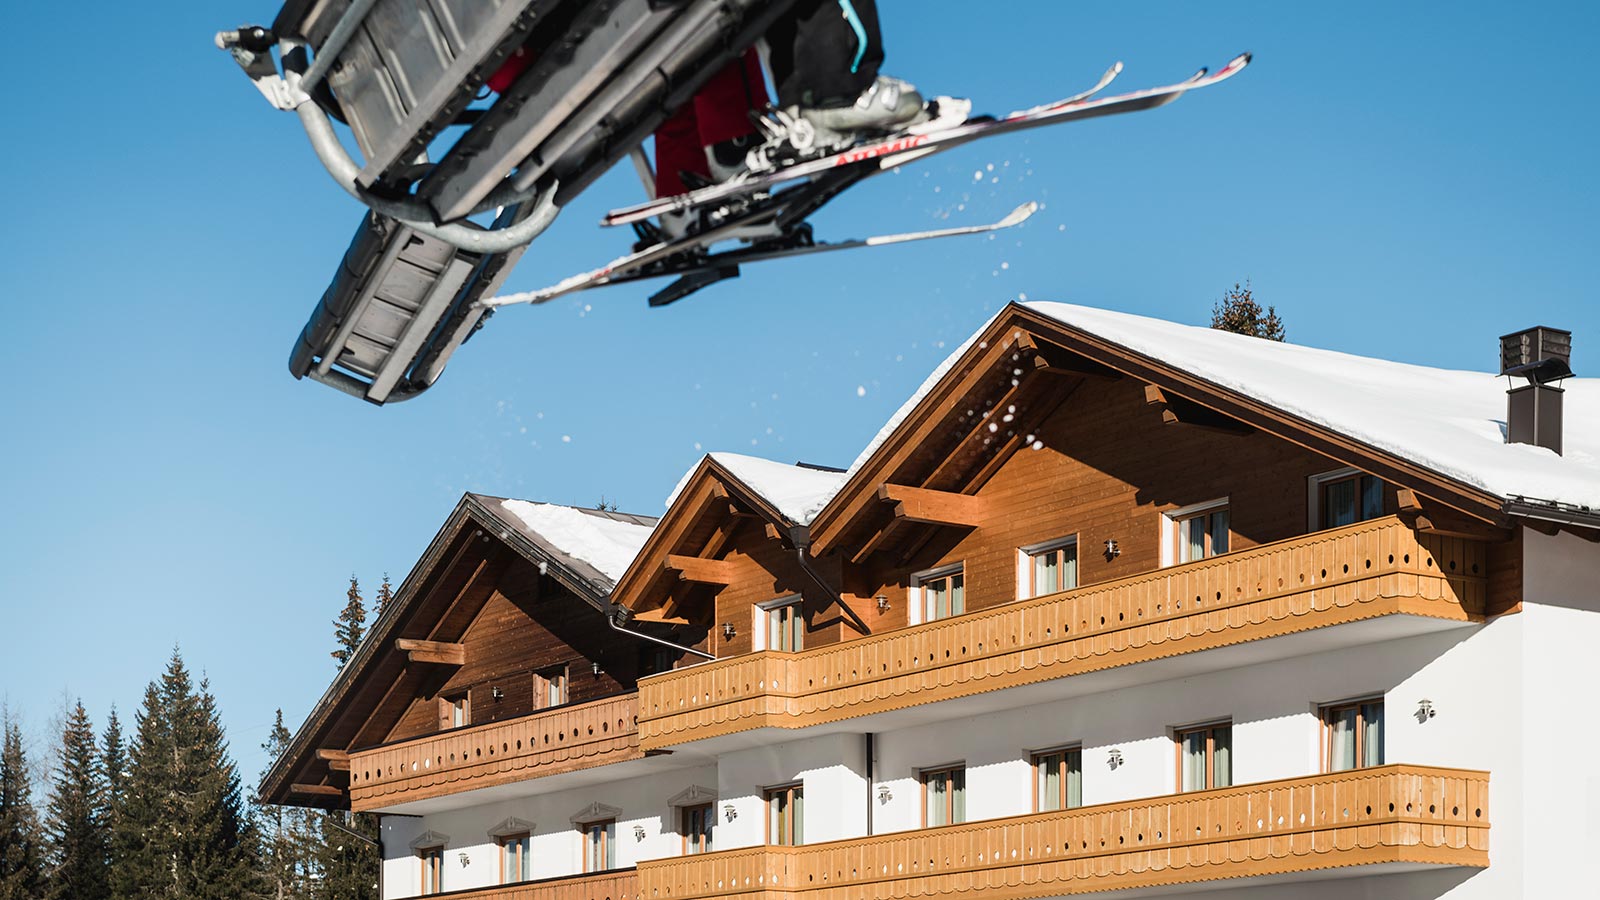 Detail of some skiers on the cable car with the Hotel Laguscei in Arabba in the background